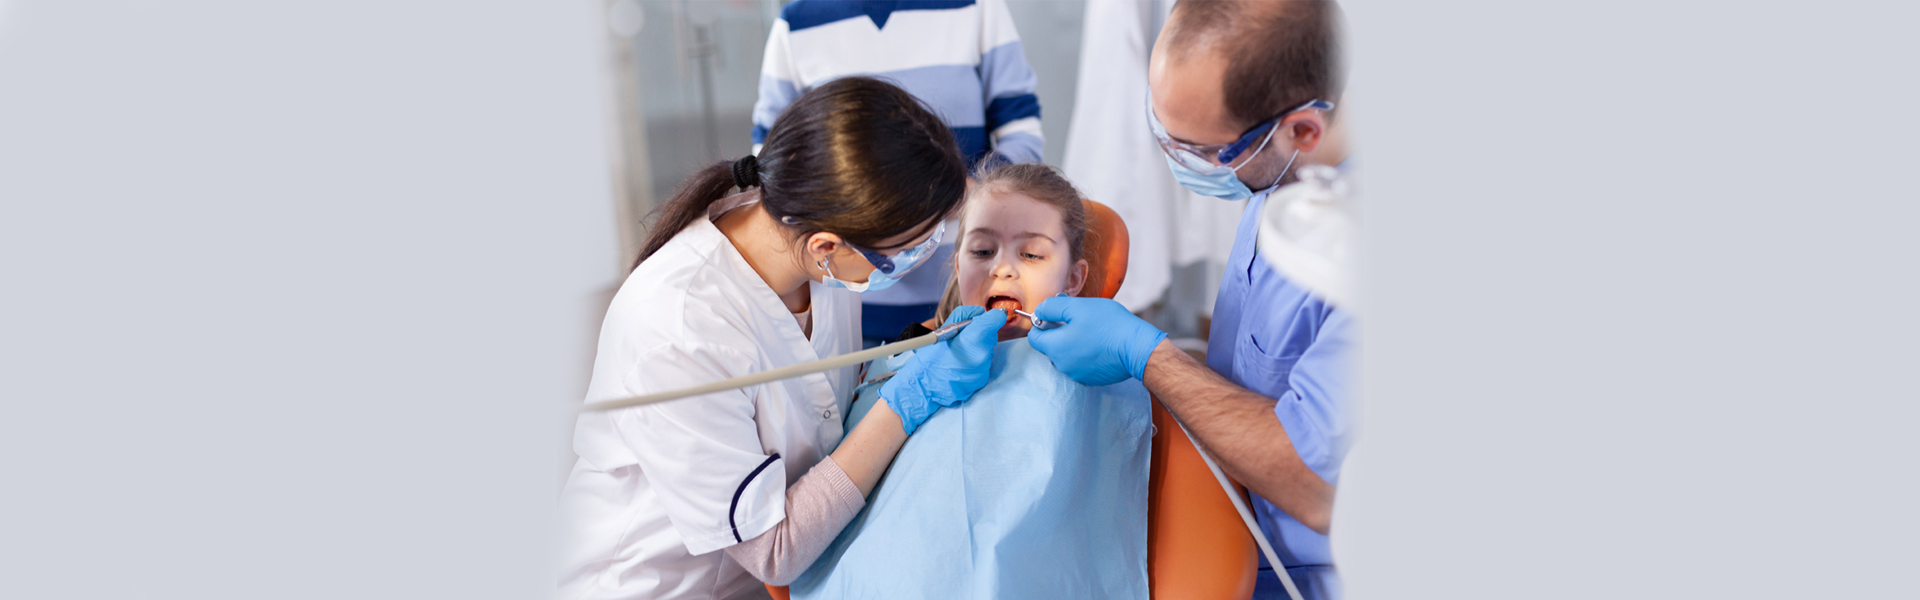 Preventing Childhood Tooth Decay: Tips for Parents to Protect Their Child’s Teeth